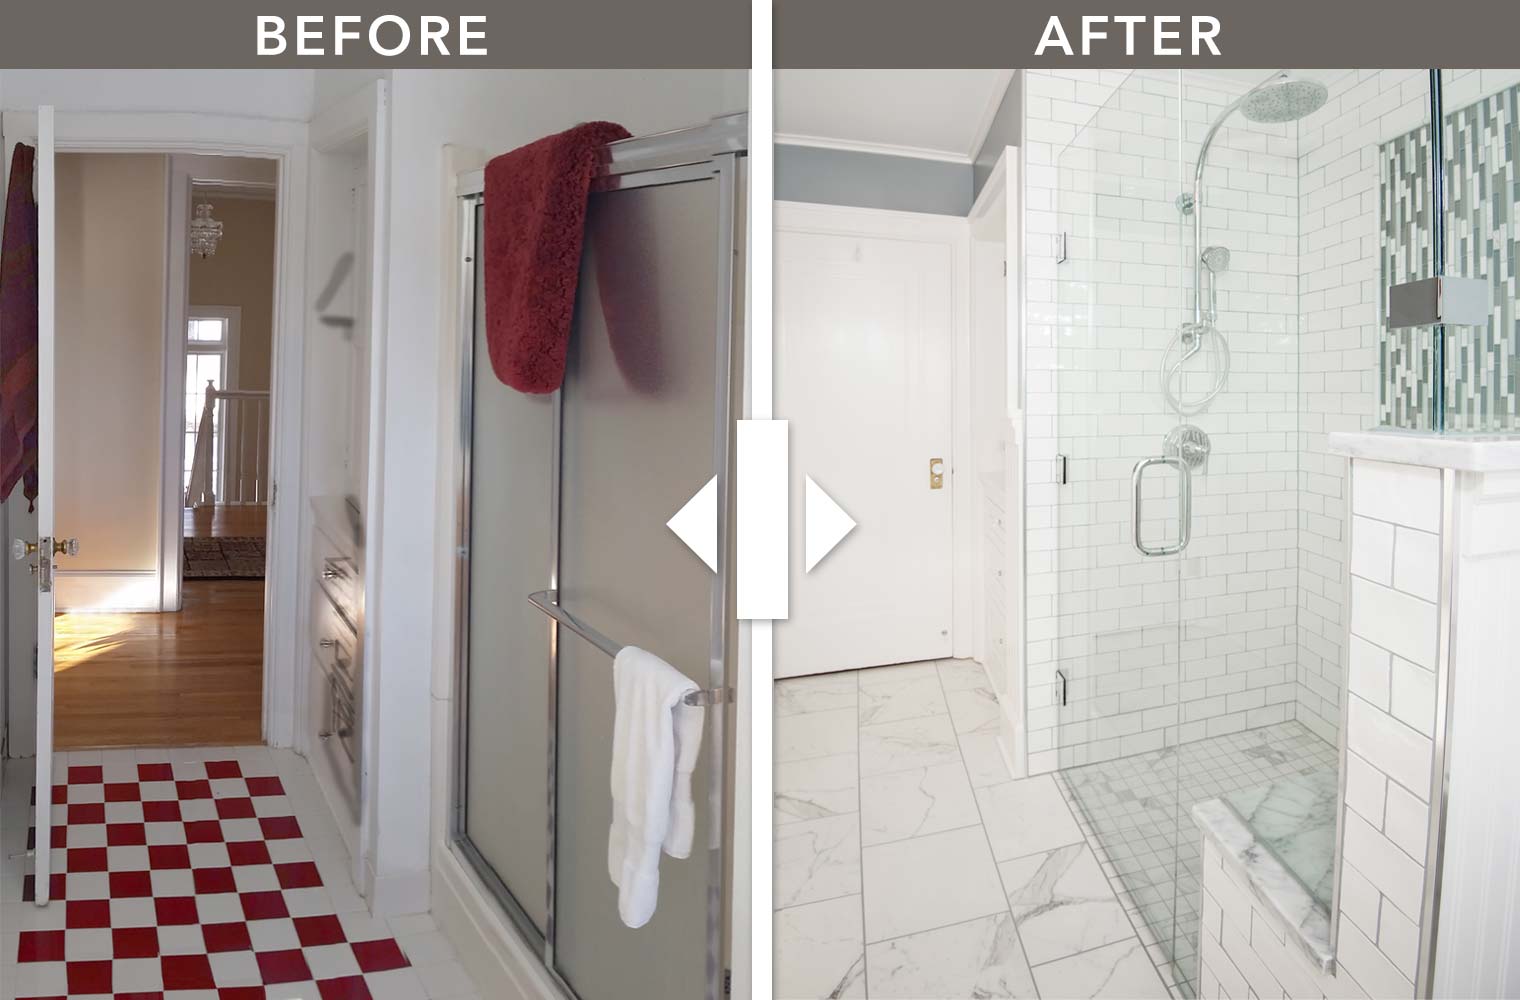 Before and after bathroom remodeling comparisons that inspire!